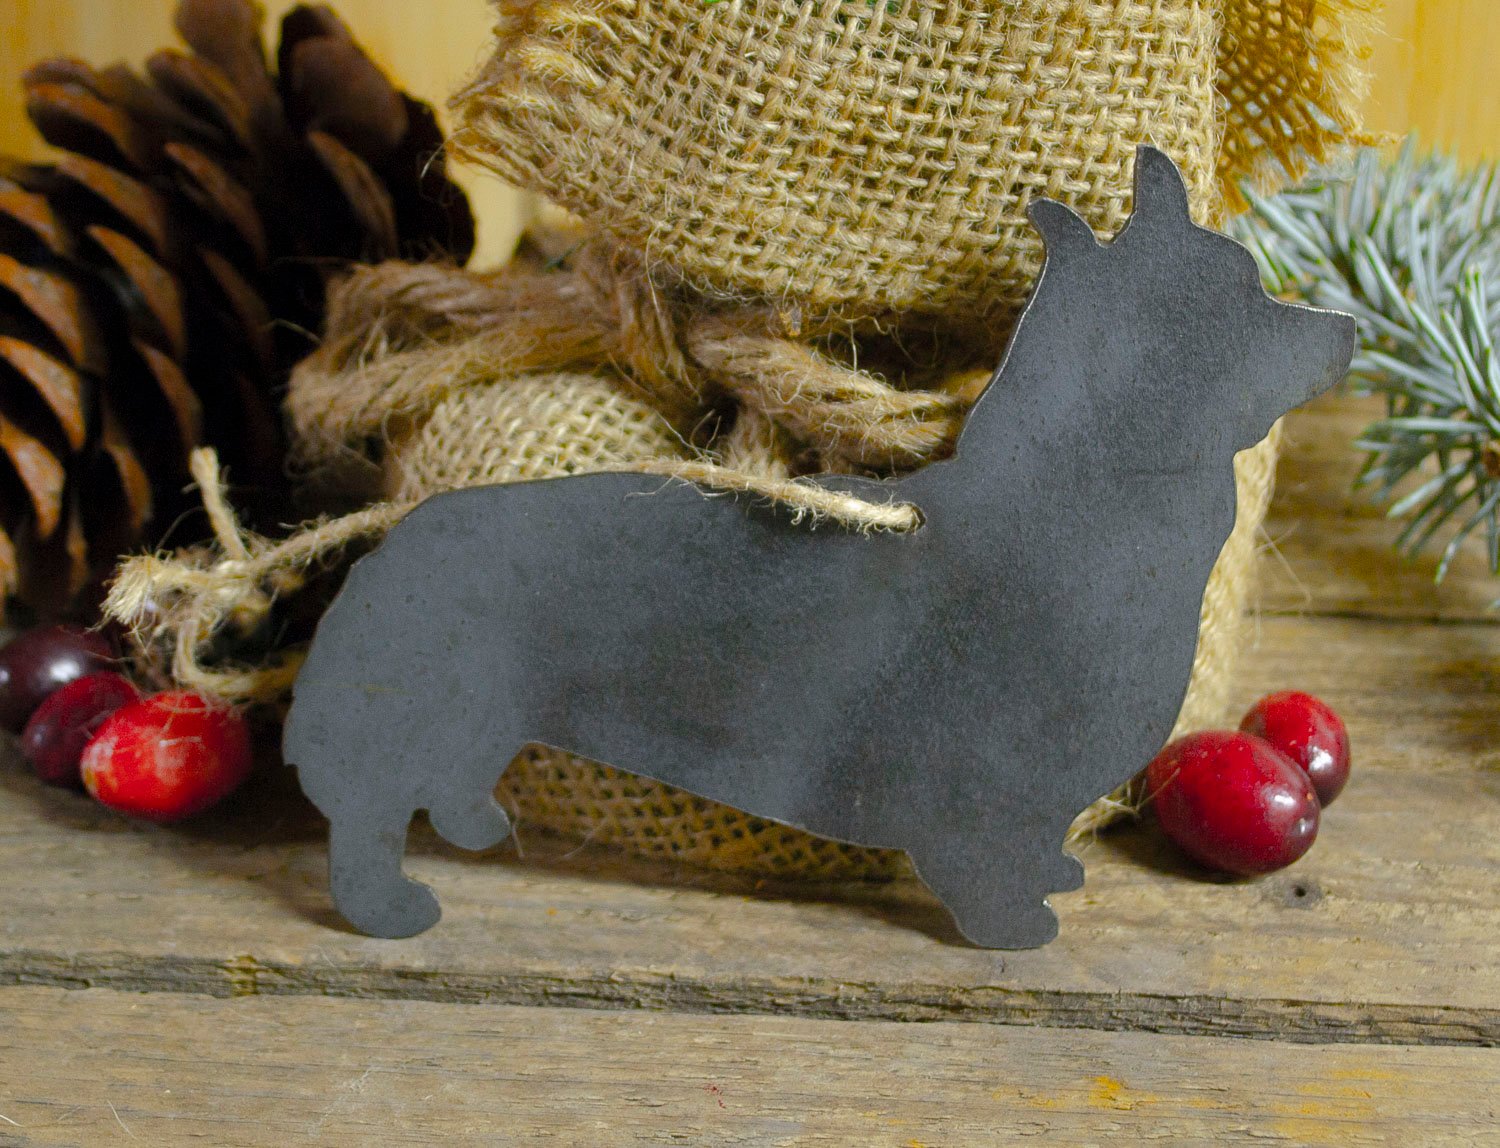 Corgi Dog Metal Christmas Ornament Tree Stocking Stuffer Party Favor Holiday Decoration Raw Steel Gift Recycled Nature Home Decor